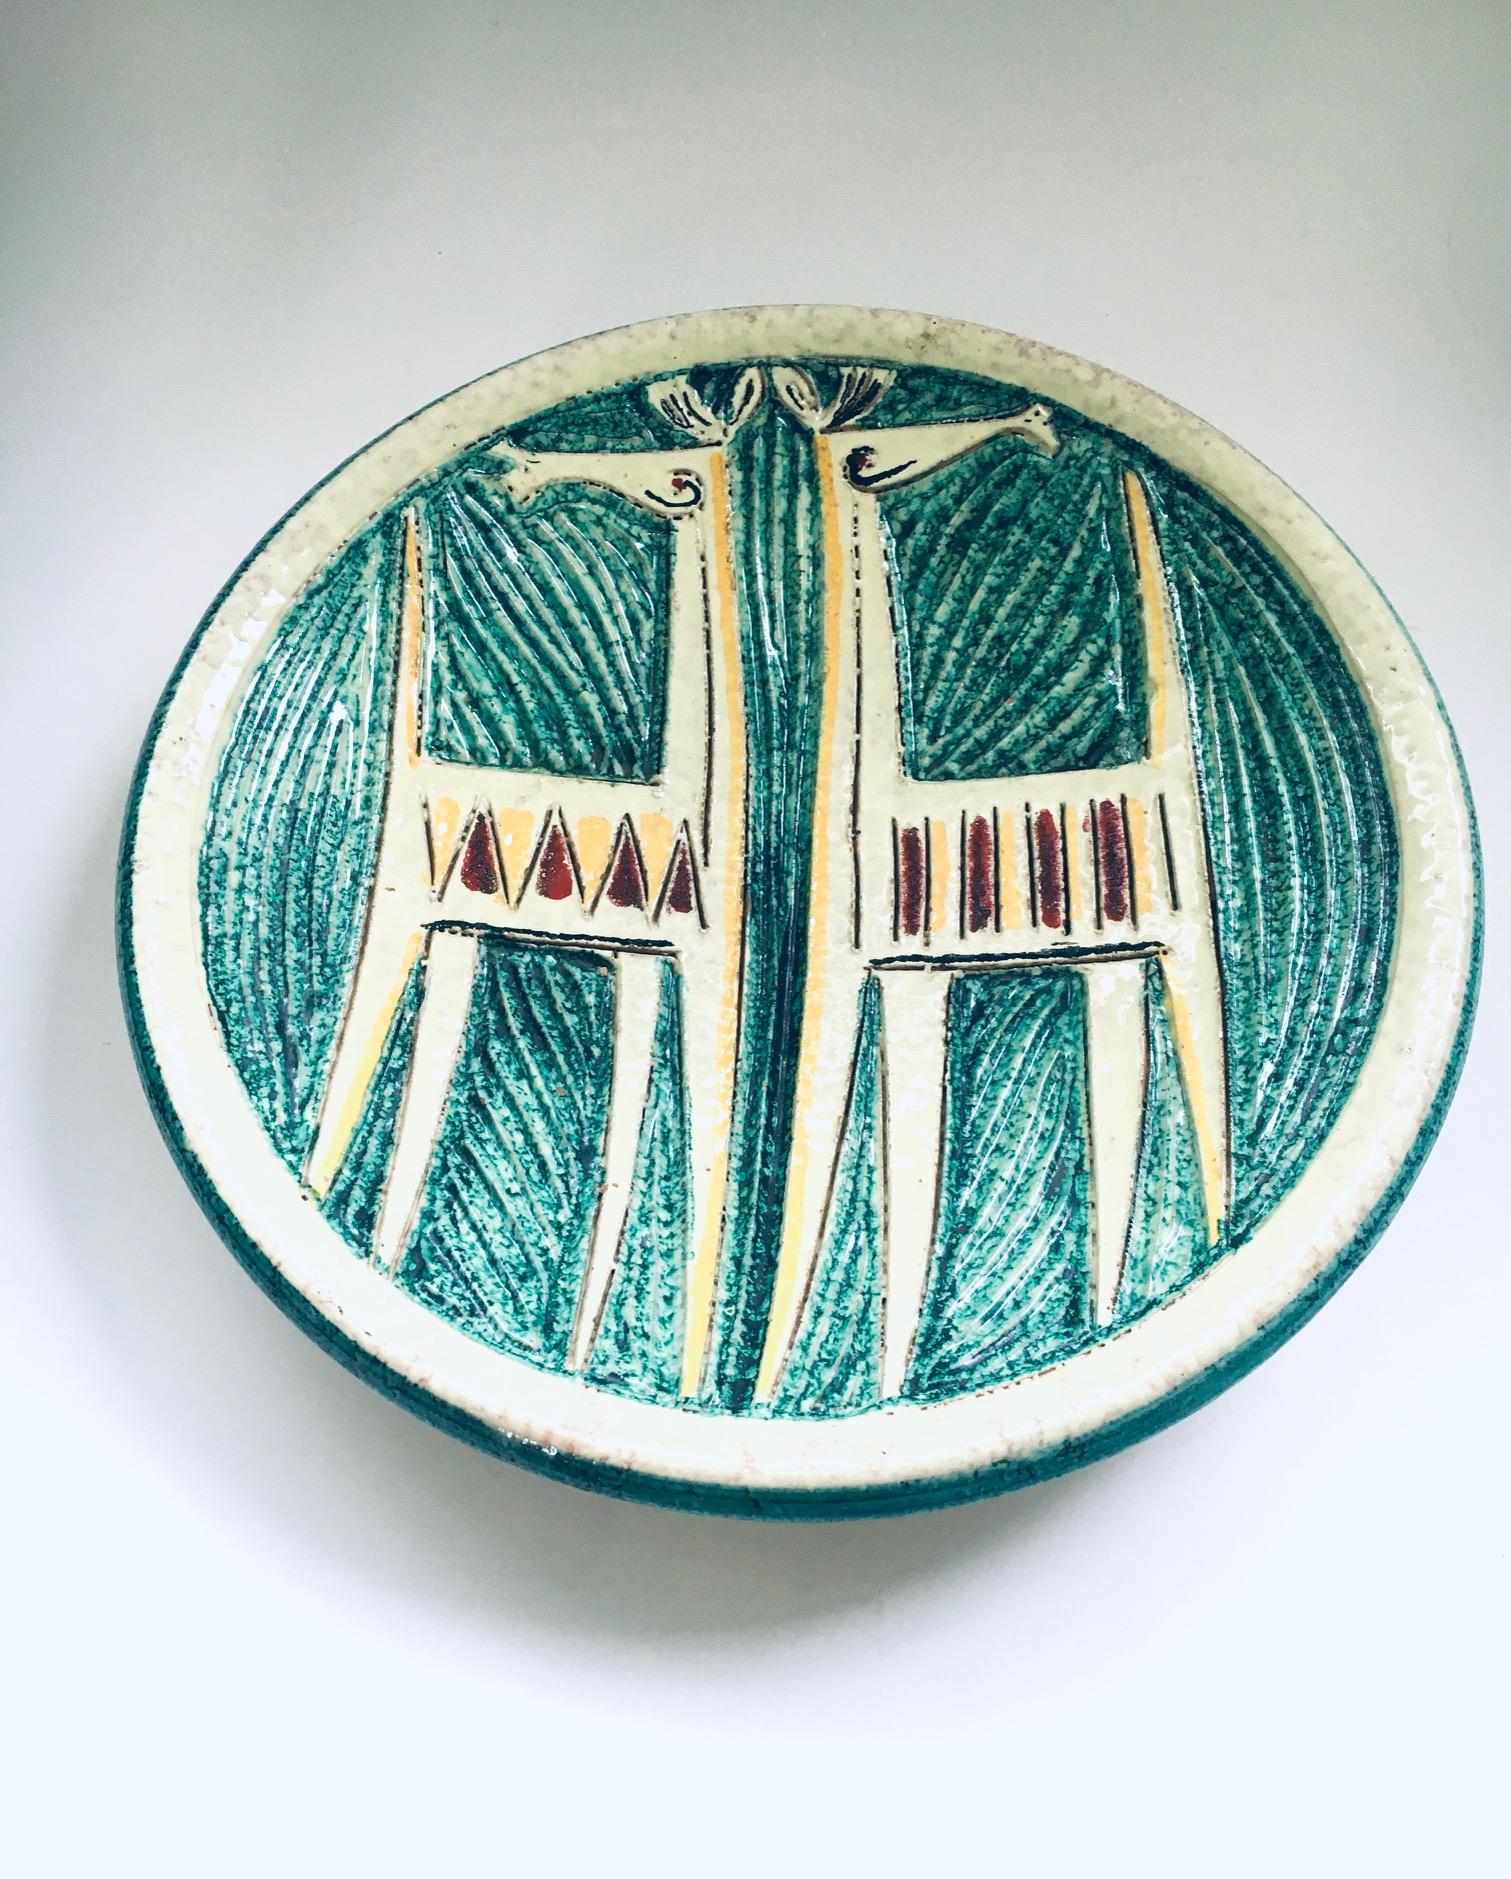 Vintage Midcentury Art Ceramic Studio Stoneware Etruscan Horses Bowl or wall plate by Fratelli Fanciullacci. Made in Italy, 1960's period. Signed Italy 63/74 on the bottom. Beautiful pale yellow and green glazes with red, yellow and black details.